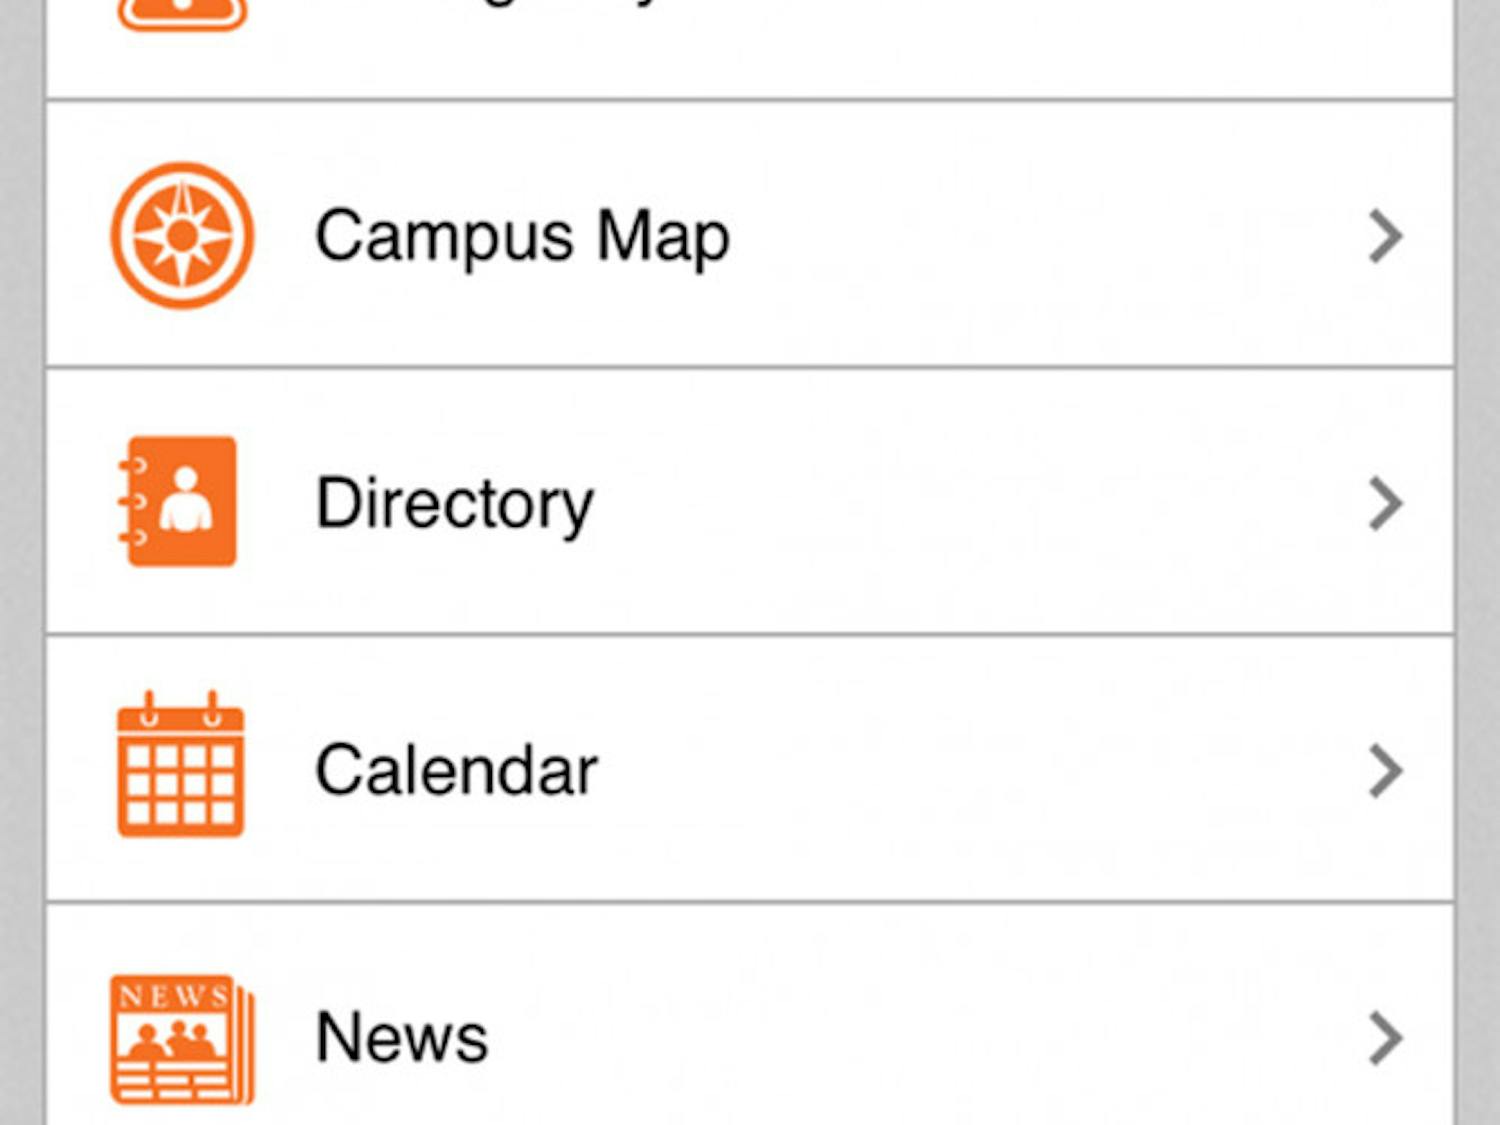 The UF Mobile app, released in June for both iPhone and Android, is anticipating updates in Spring, featuring dining menu information, parking information and more.